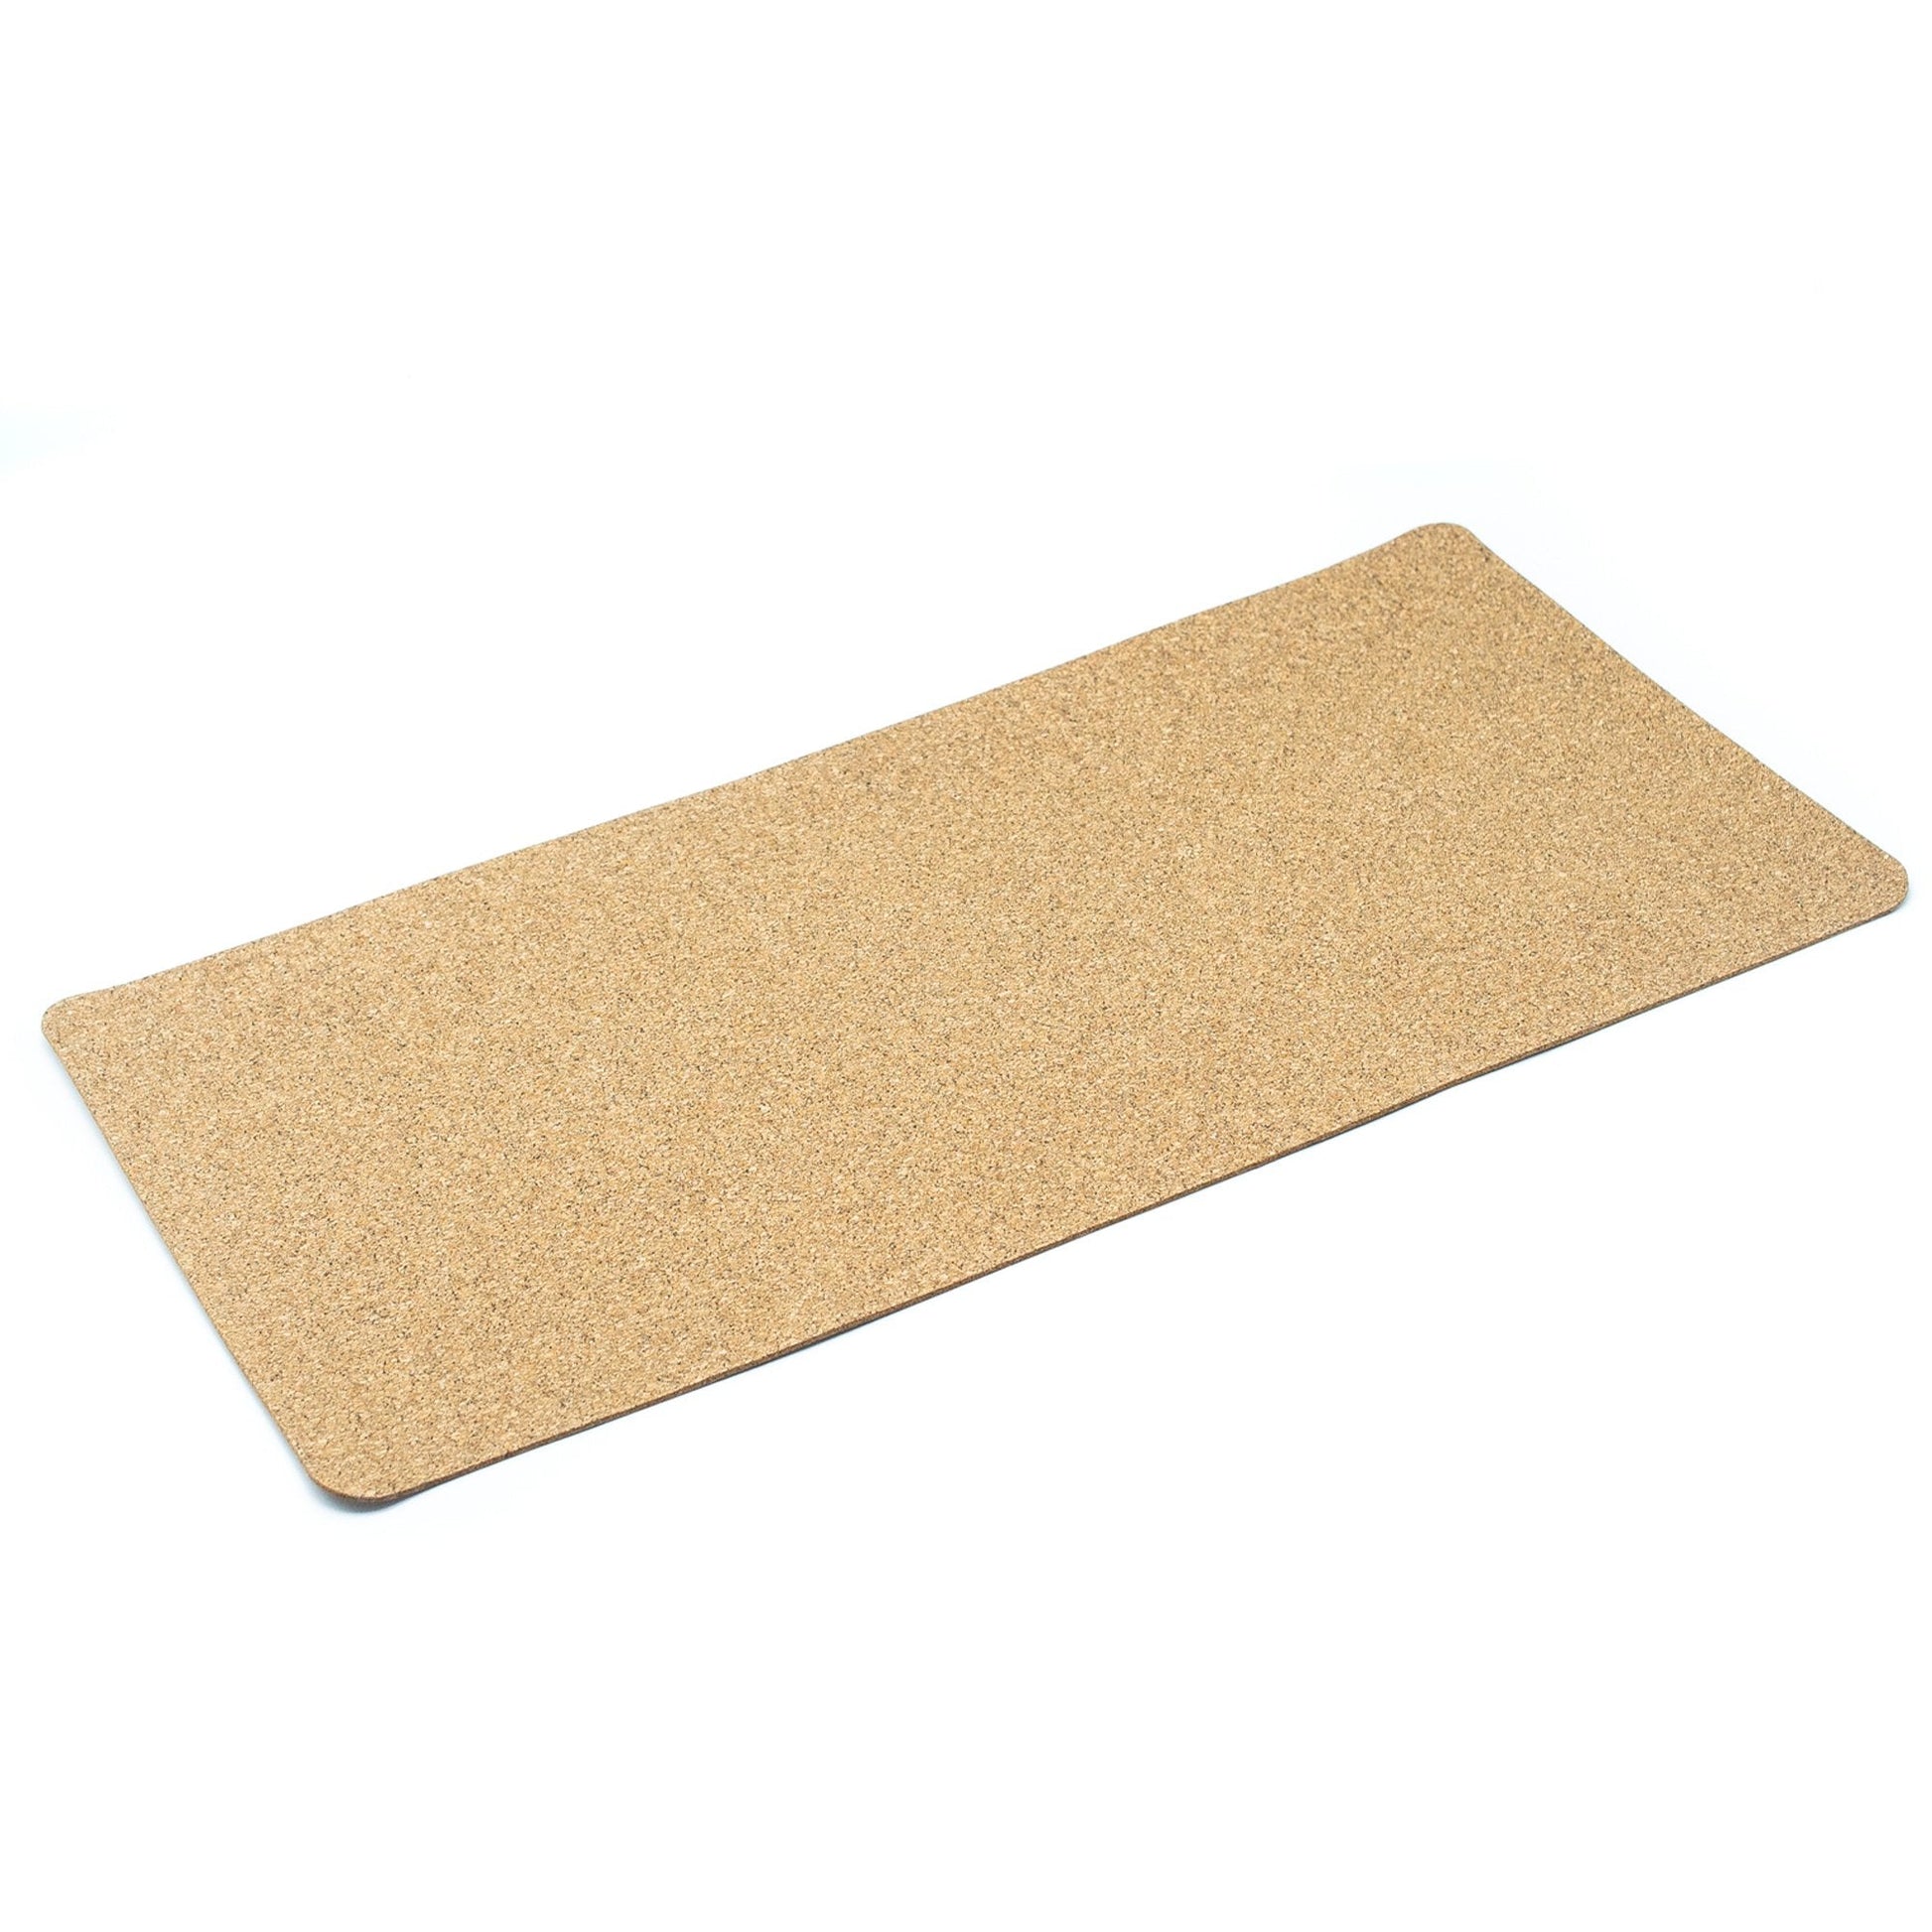 Water Repellent Desk Mouse Pad Cork Leather | THE CORK COLLECTION